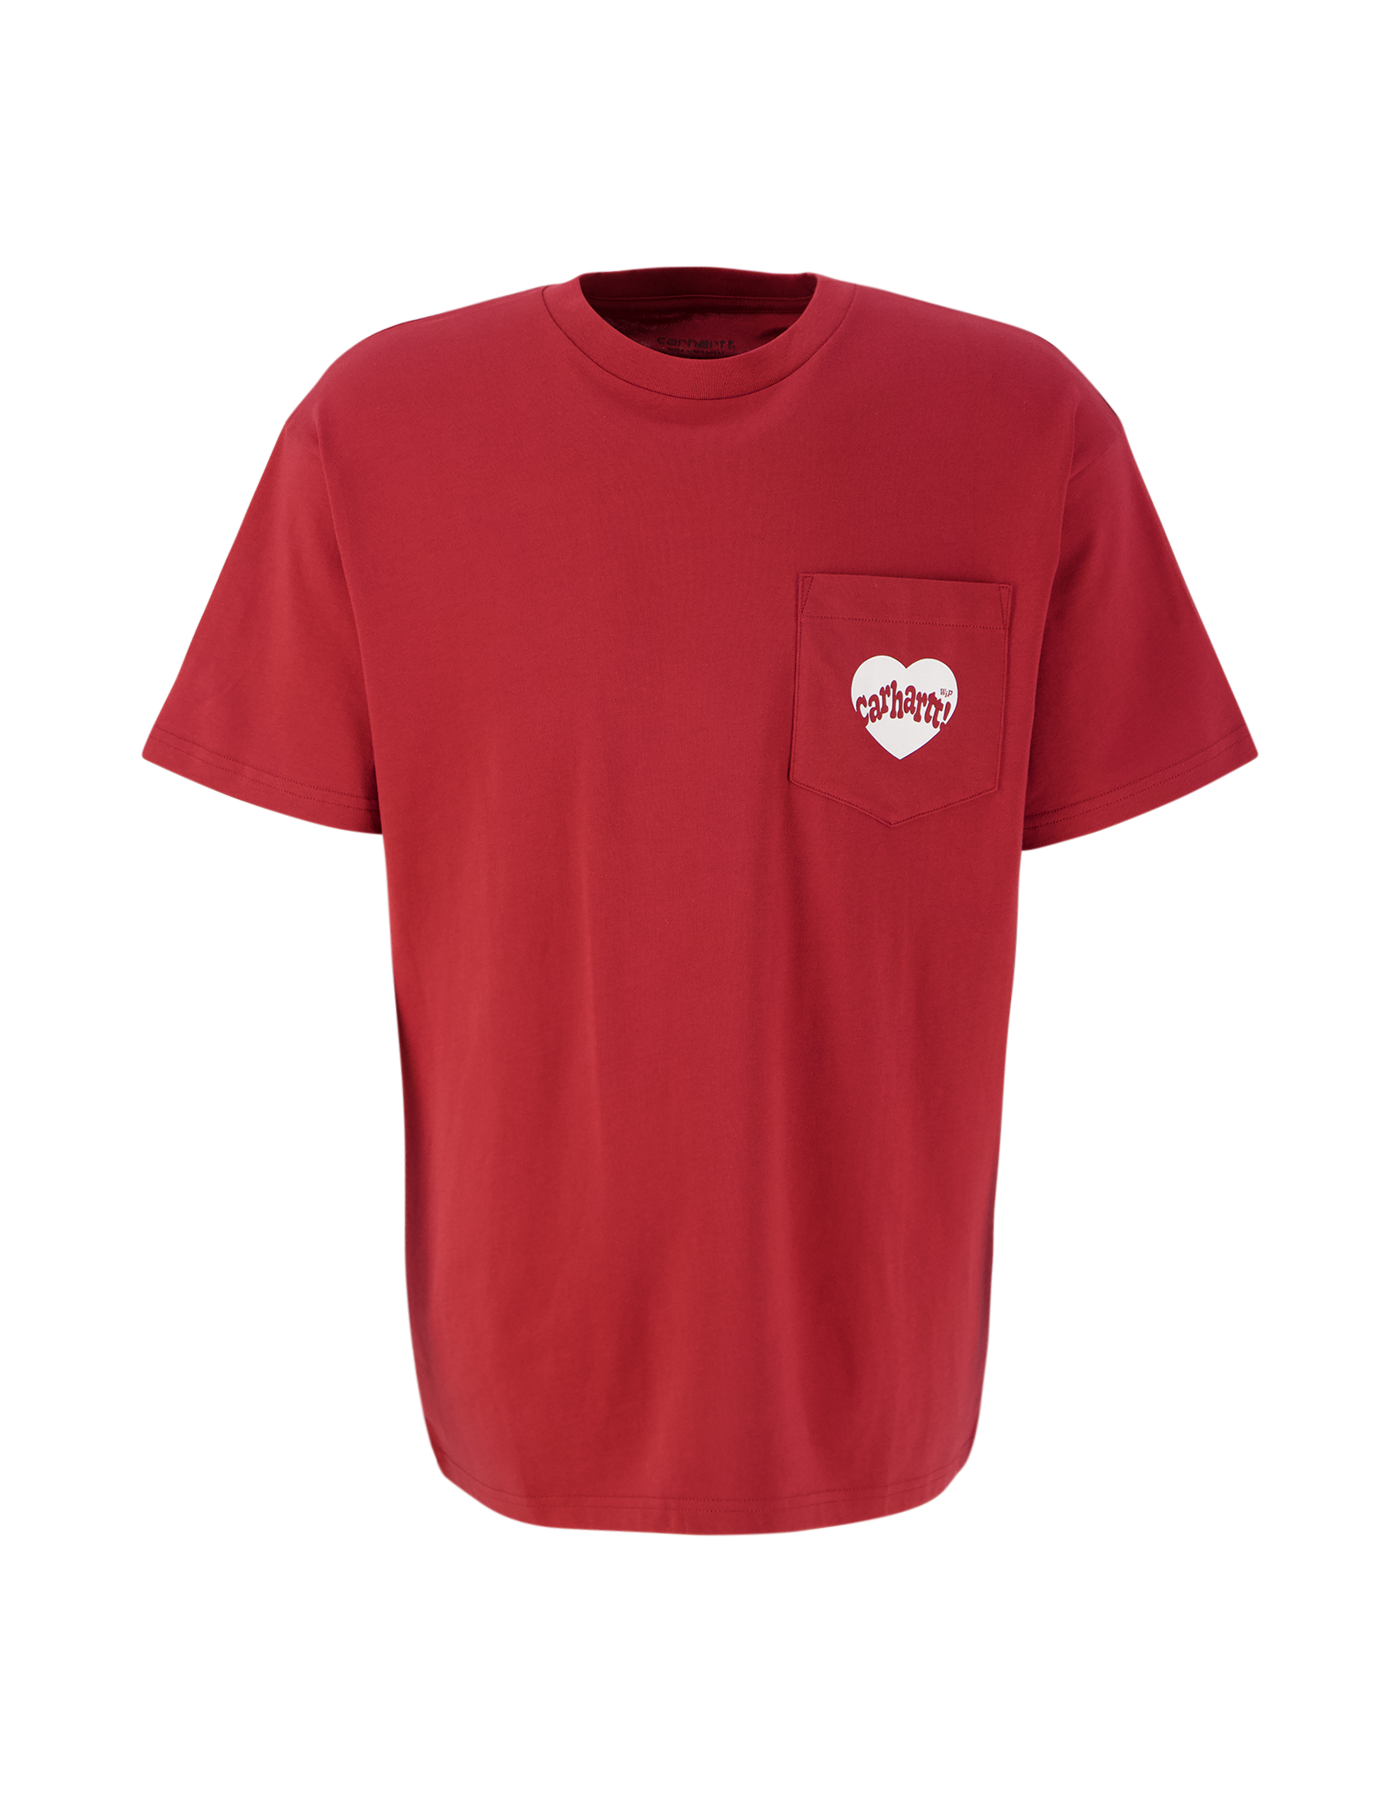 Carhartt WIP S/S Amour Pocket T-Shirt ROOD 1